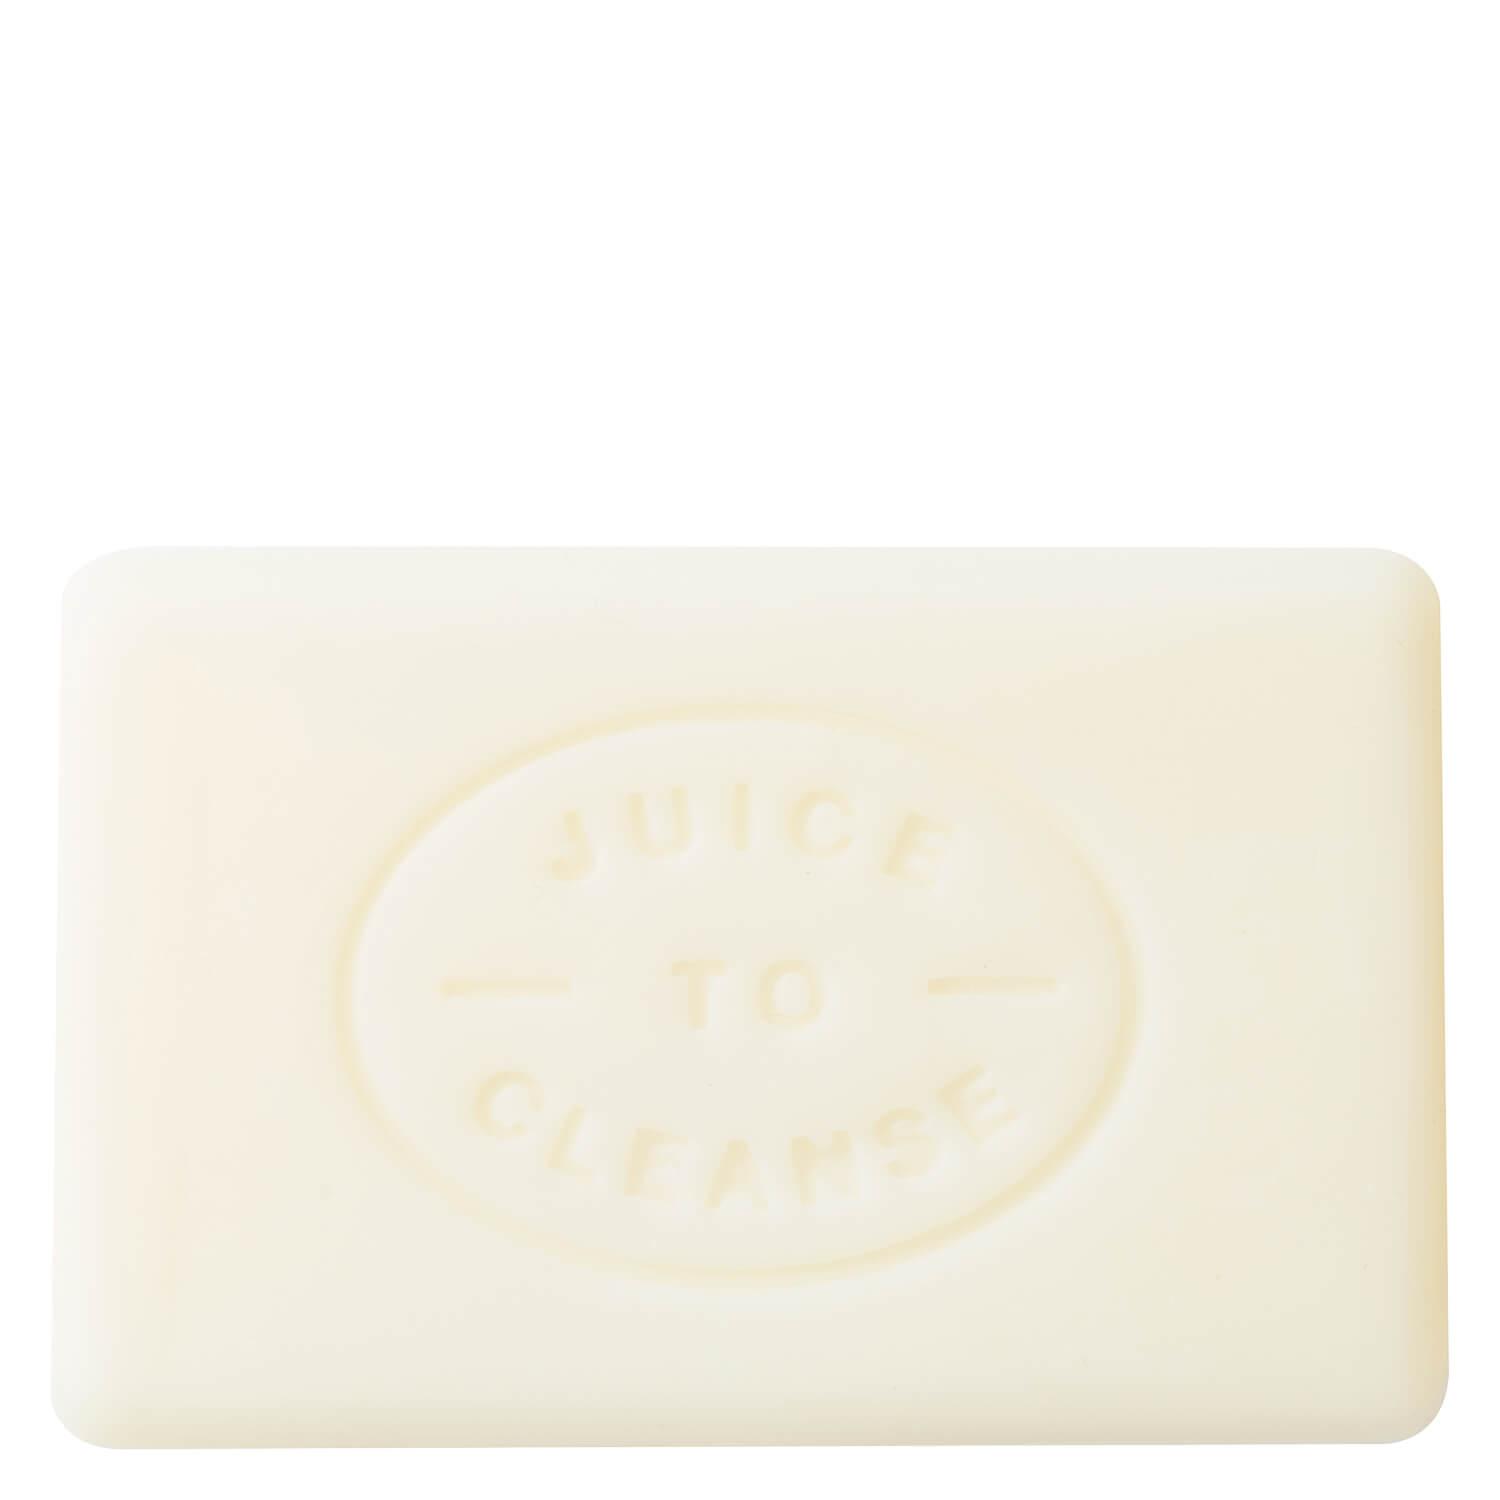 Juice to Cleanse - Clean Butter Moisture Bar